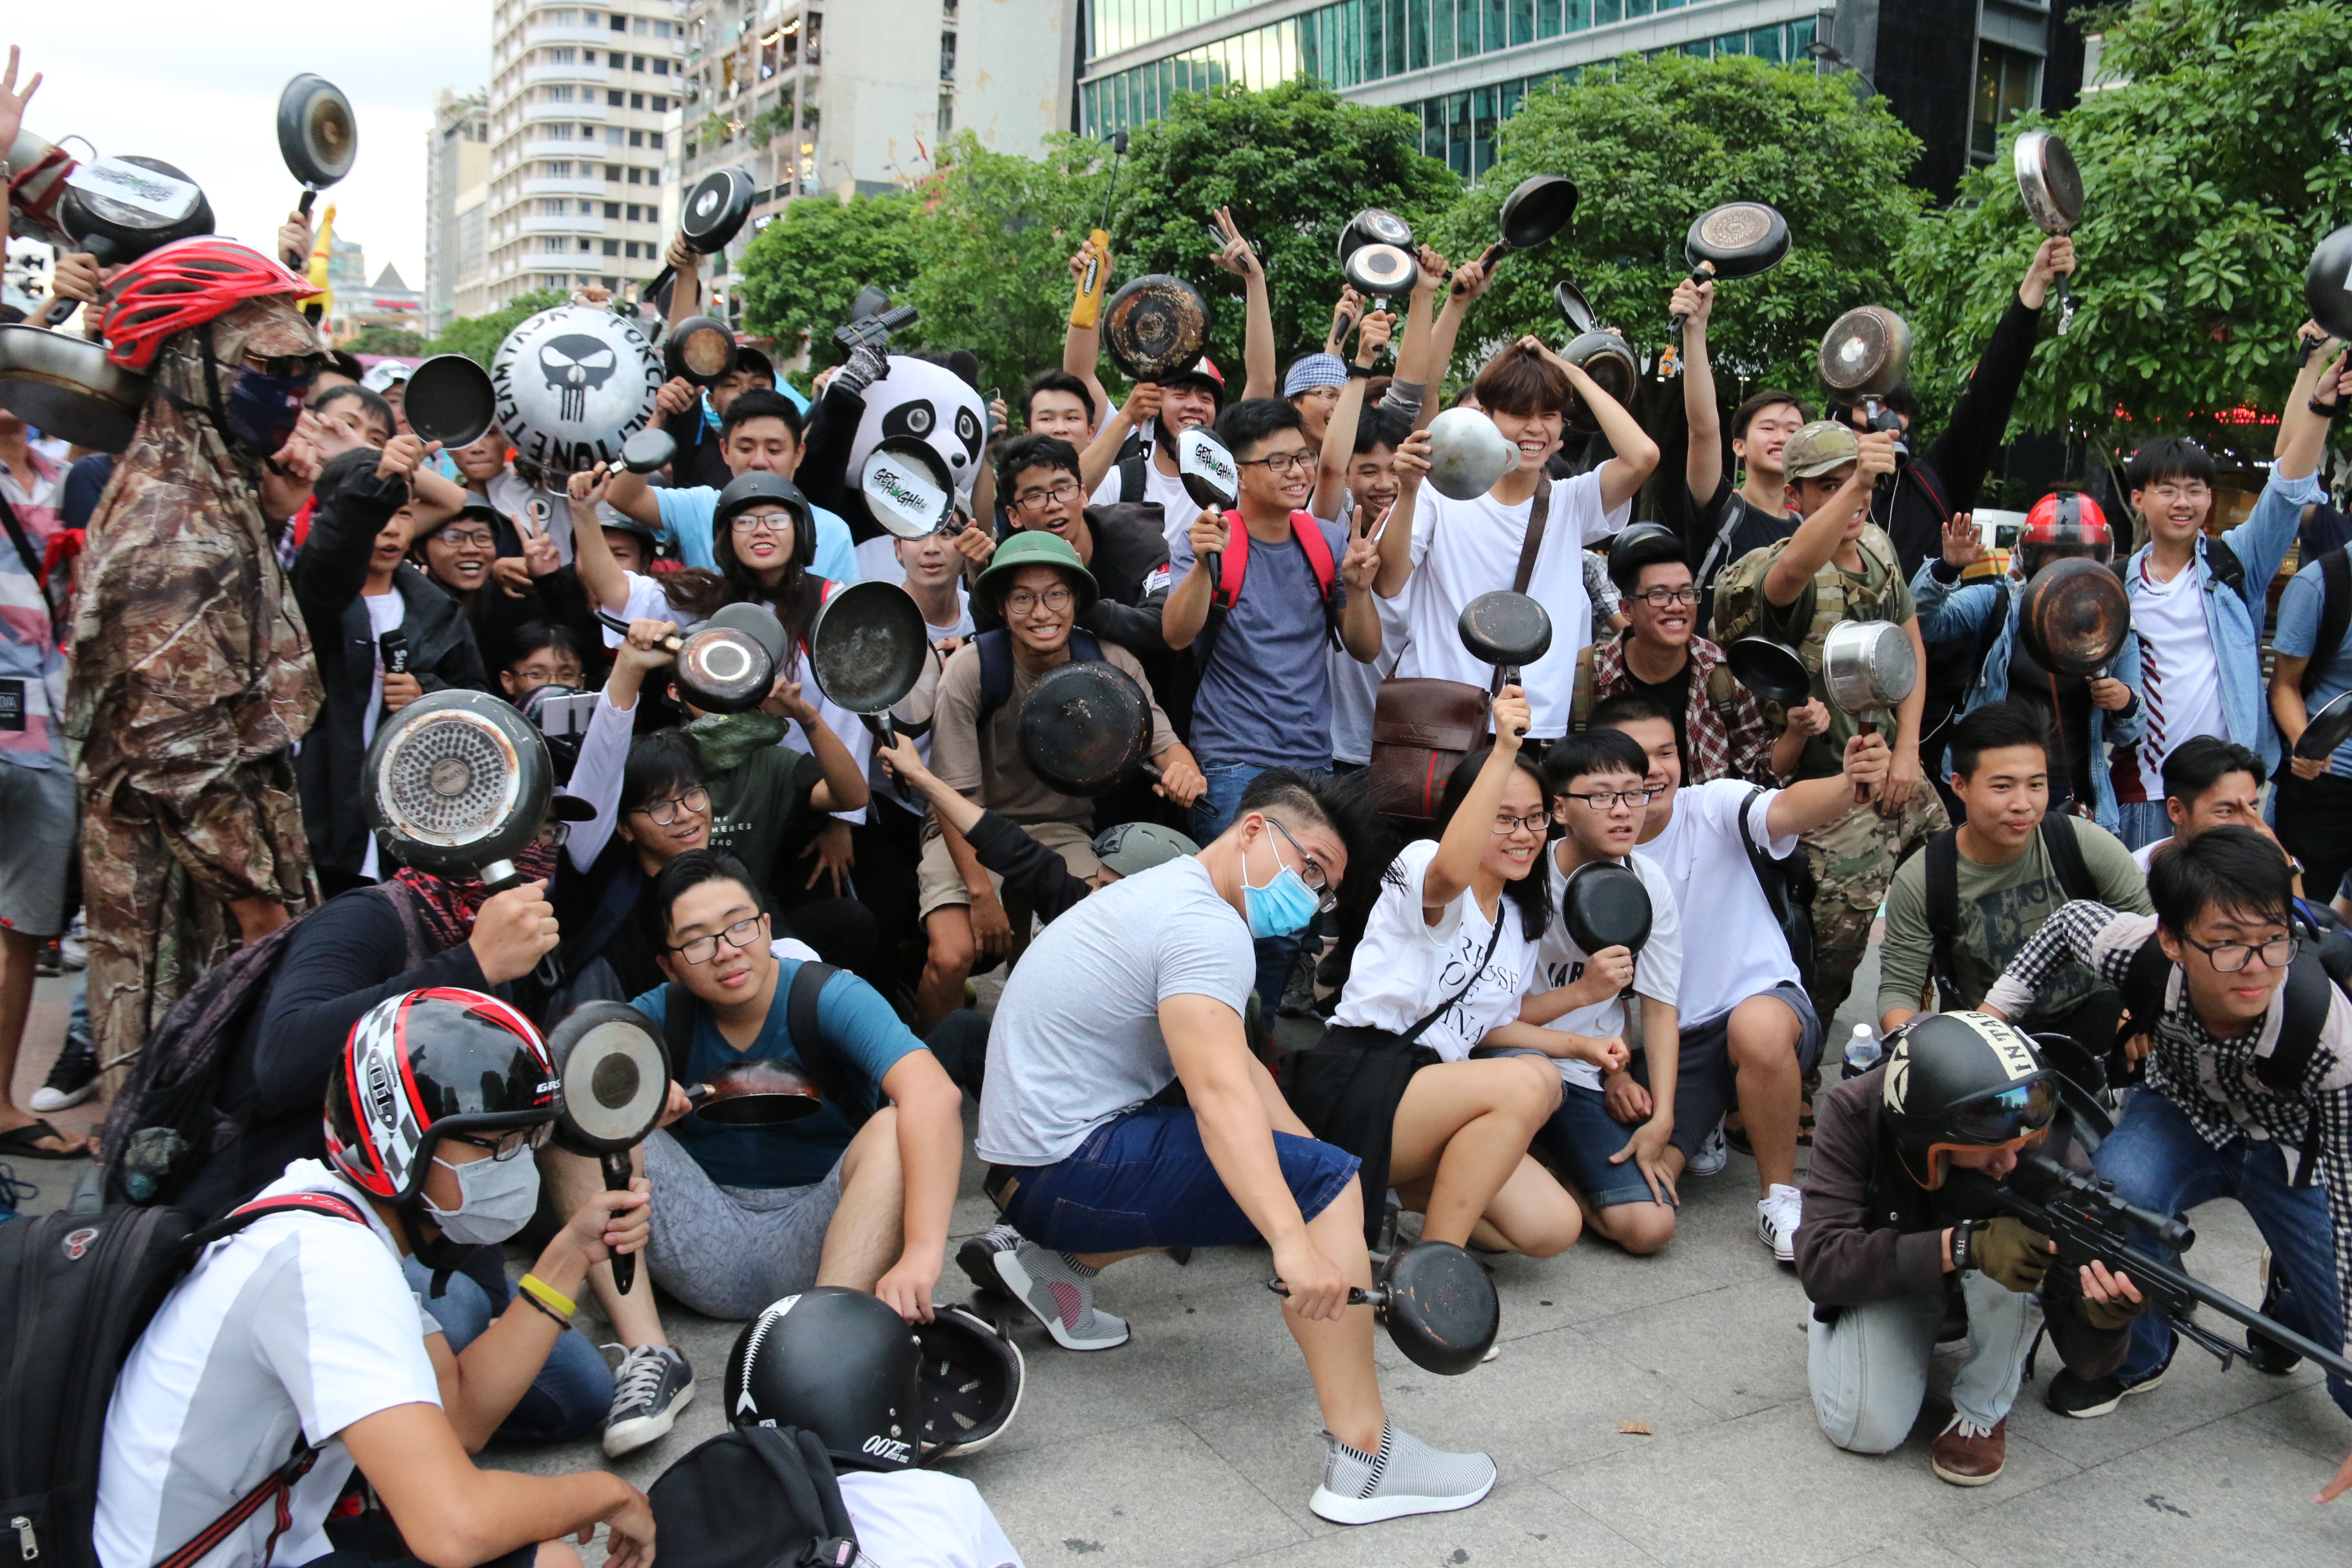 A large group of young people pose with their frying pans.